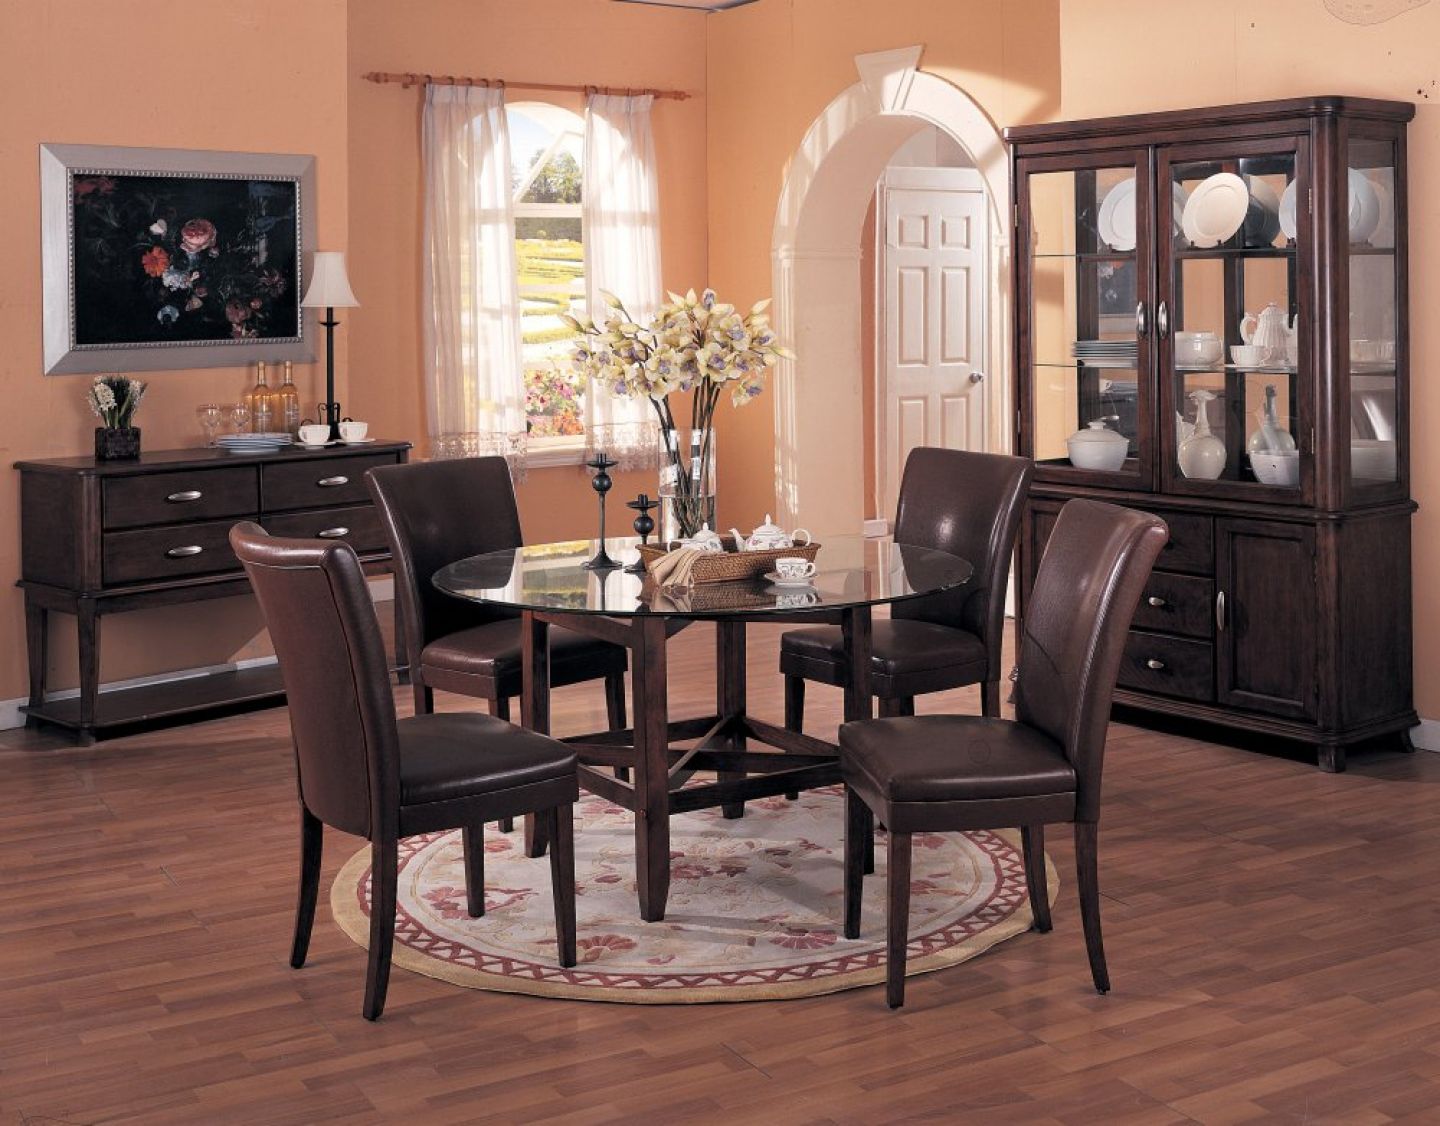 Dining Room For Imposing Dining Room Rug Suited For Brown Chairs Completing Dining Table Furniture Placement Dining Room Dining Room Rug With Cozy Room Settings